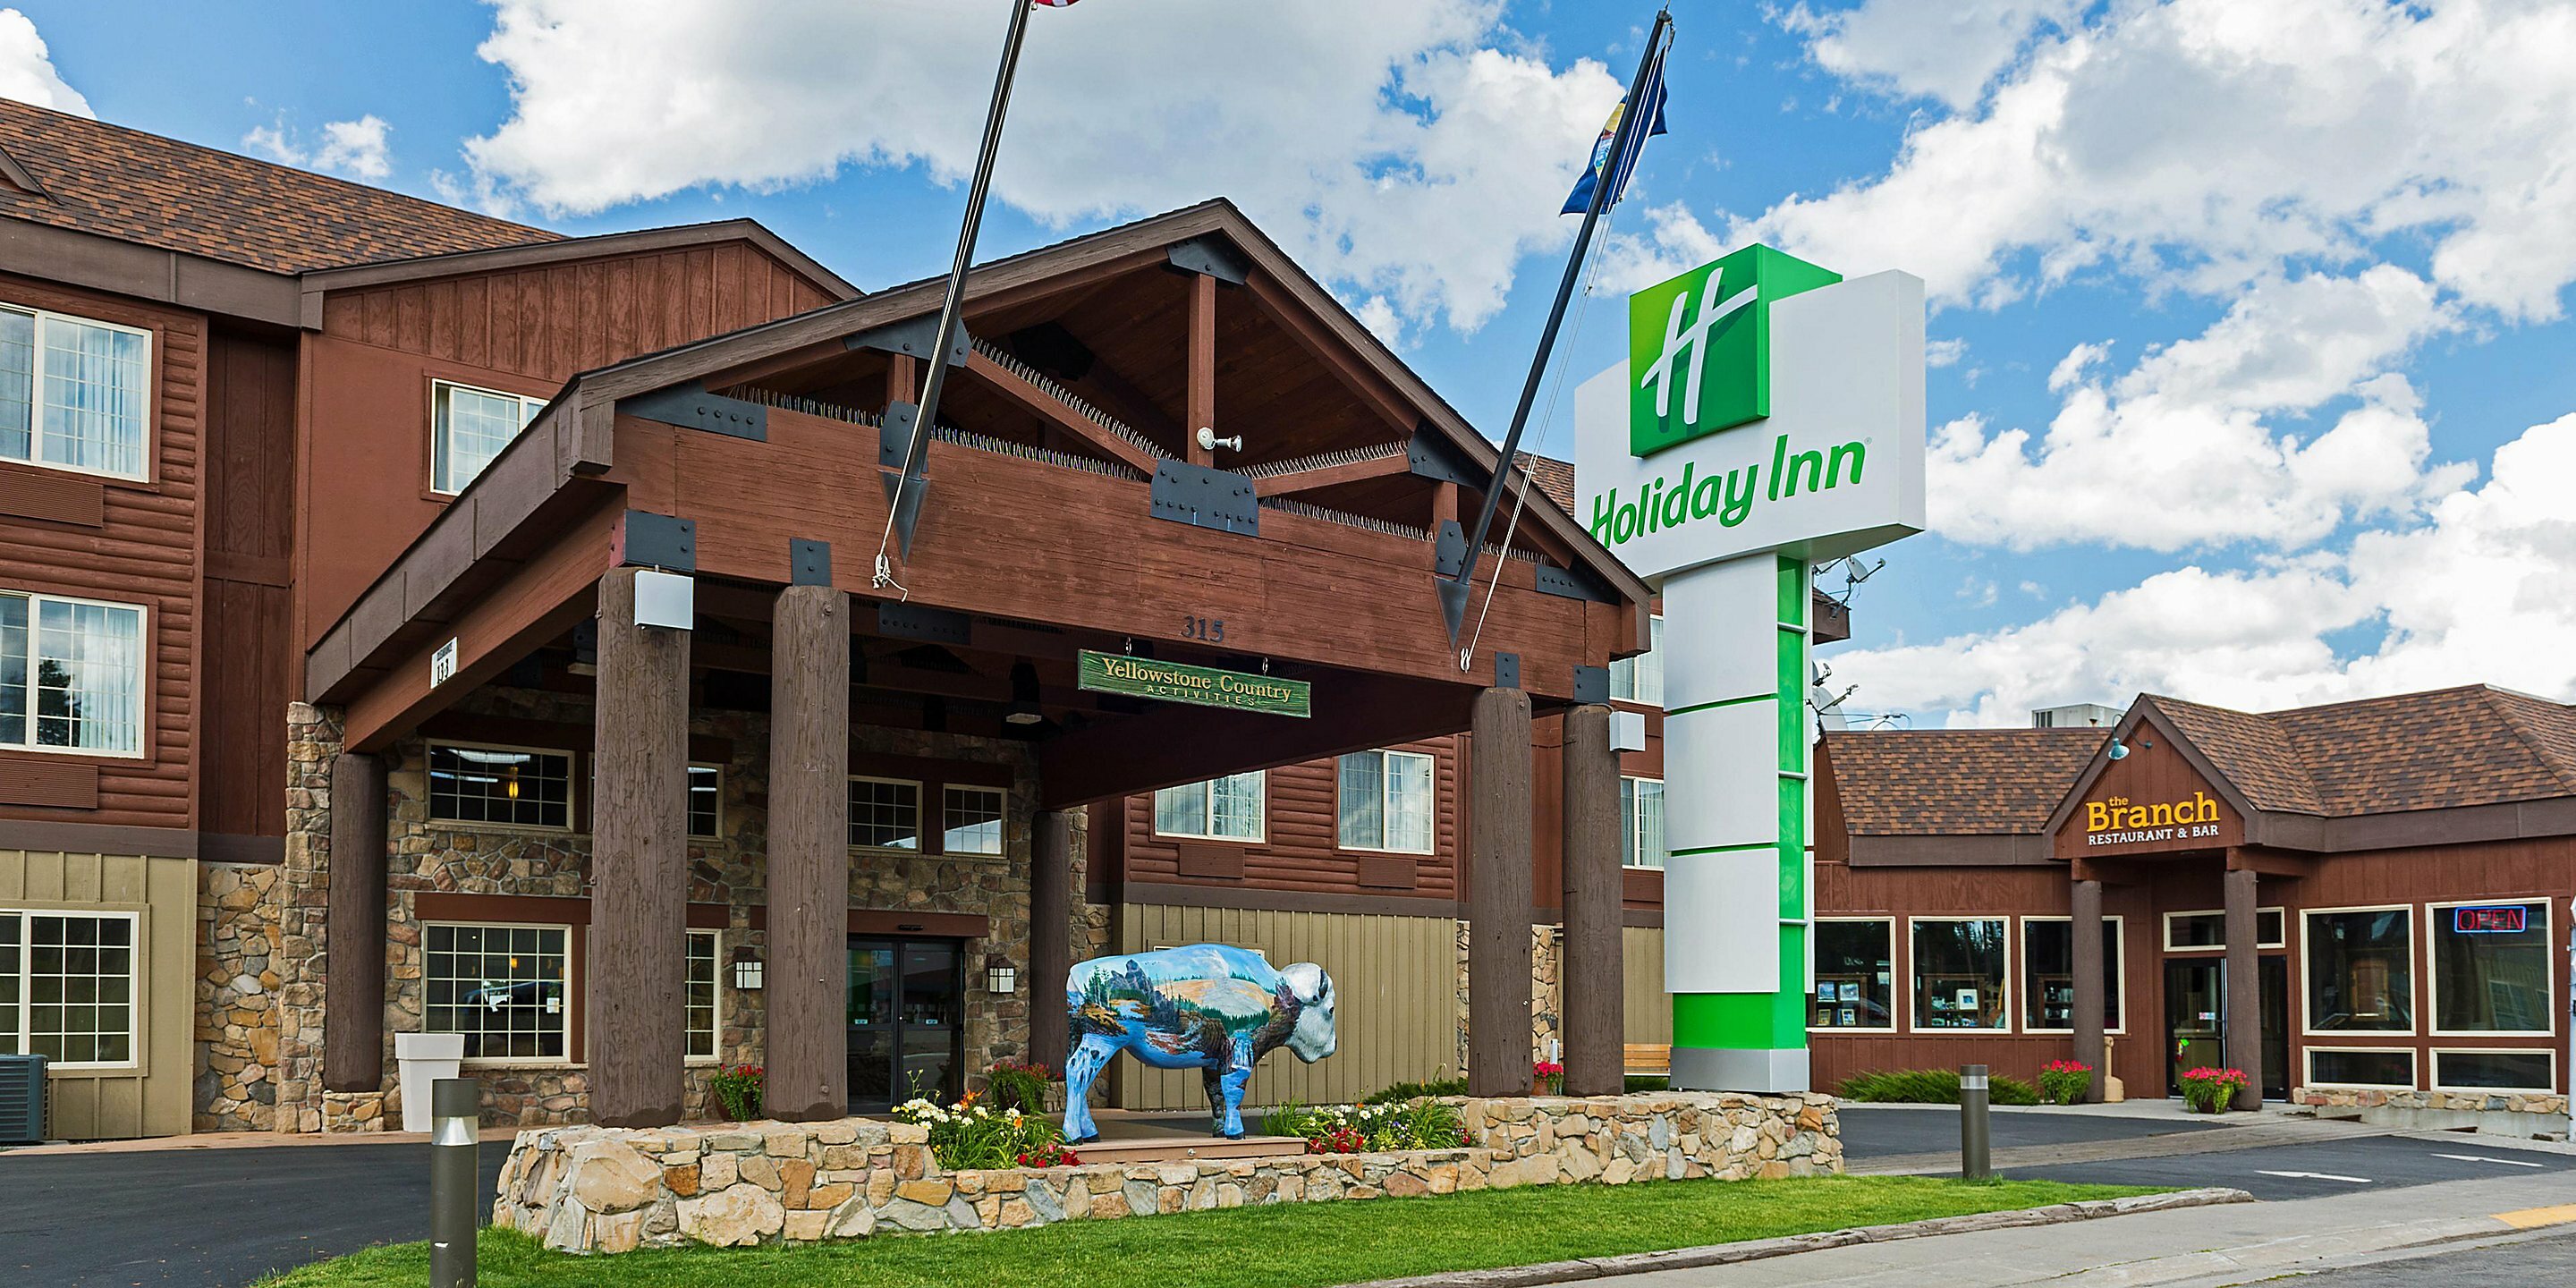 Photo of Holiday Inn - West Yellowstone, West Yellowstone, MT